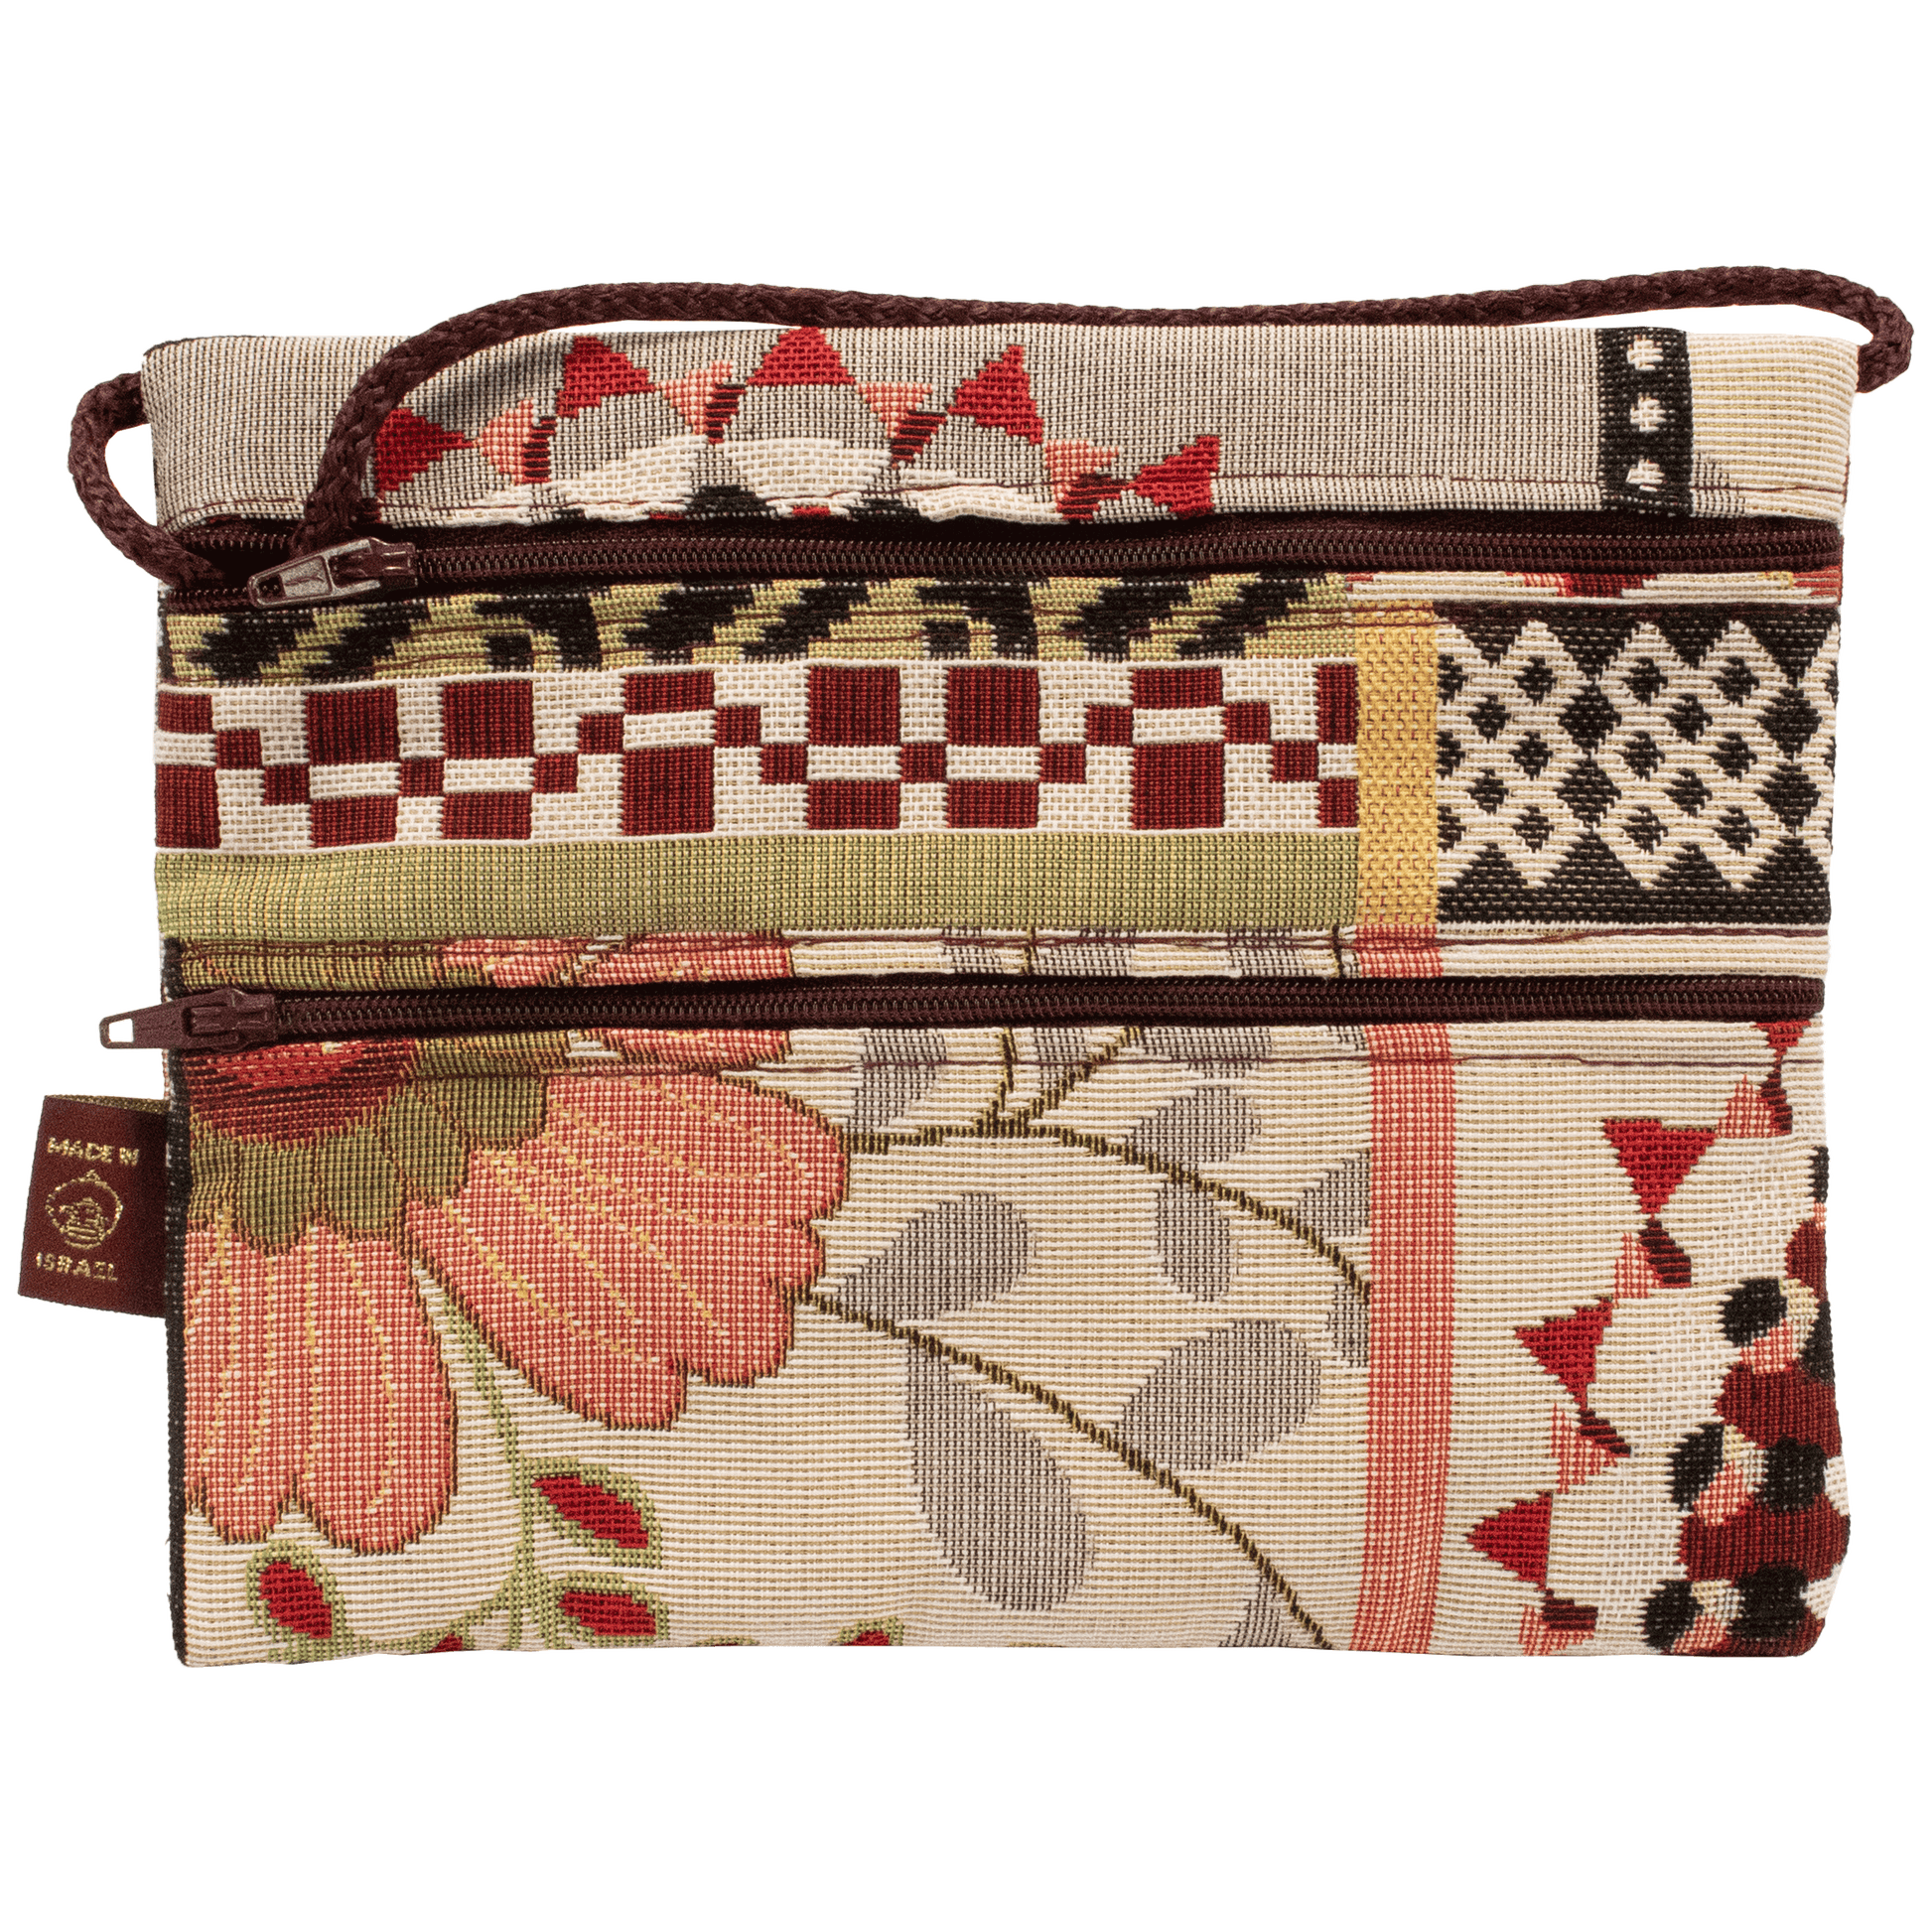 Double Zipper medium Crossbody bag with geometric and floral patterns Tones of red black and beige